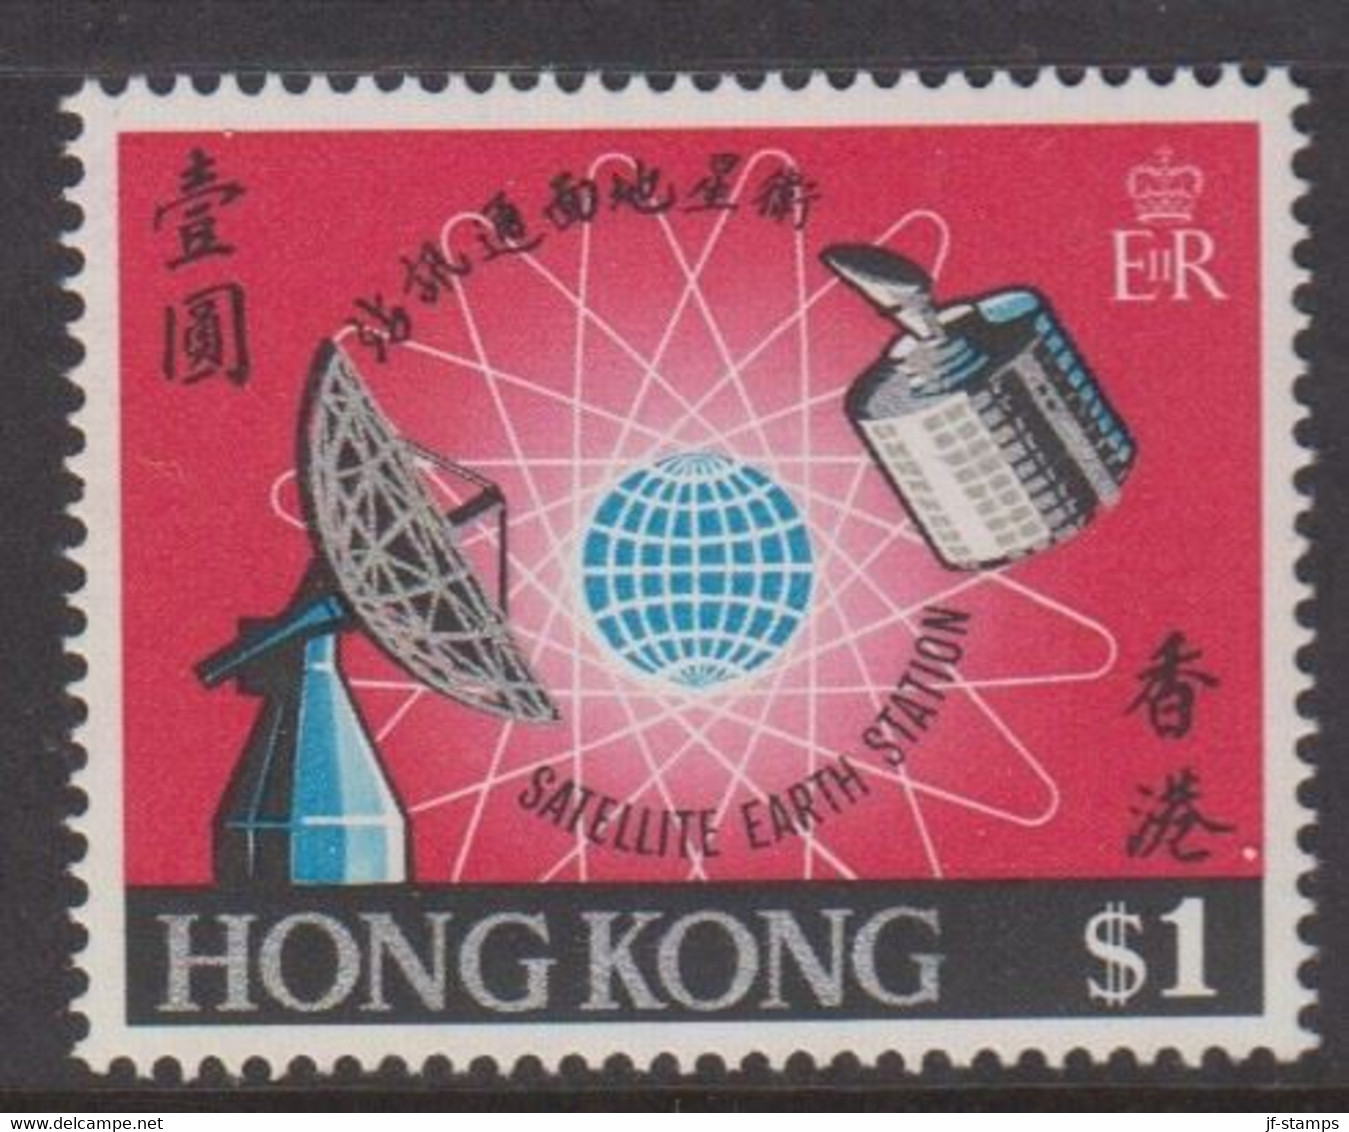 1961. HONG KONG SATELLITE EARTH STATION. $ 1. NEVER HINGED. (Michel 245) - JF422247 - Ungebraucht